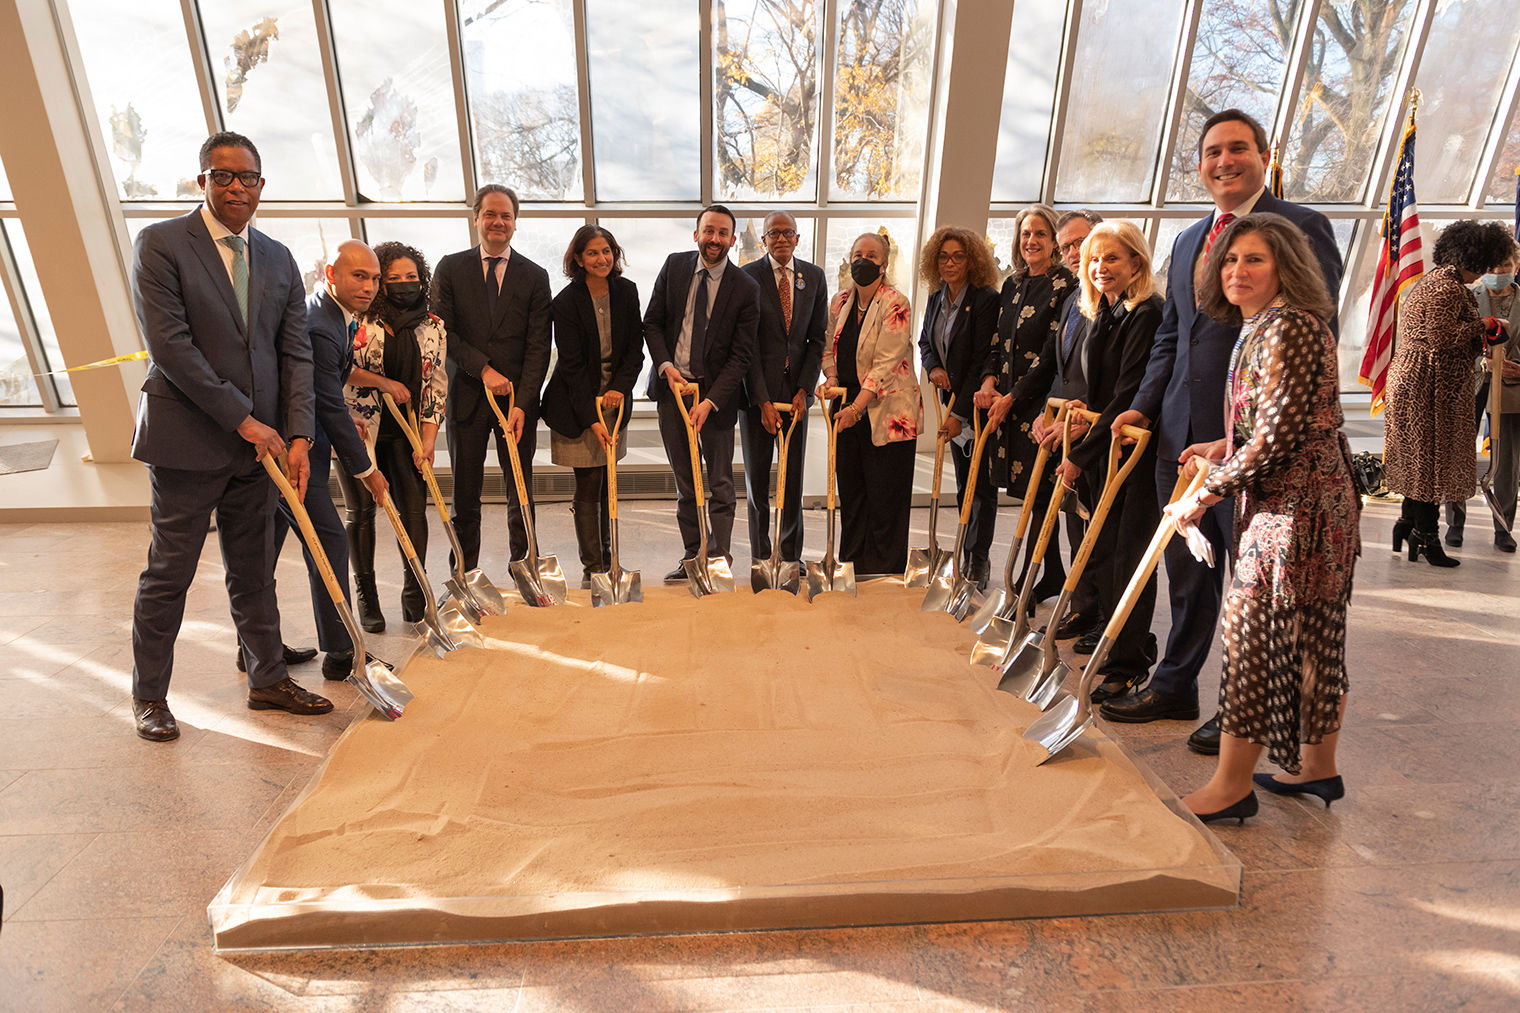 Group photograph of the groundbreaking ceremony for The Michael C. Rockefeller Wing renovation at The Met Museum